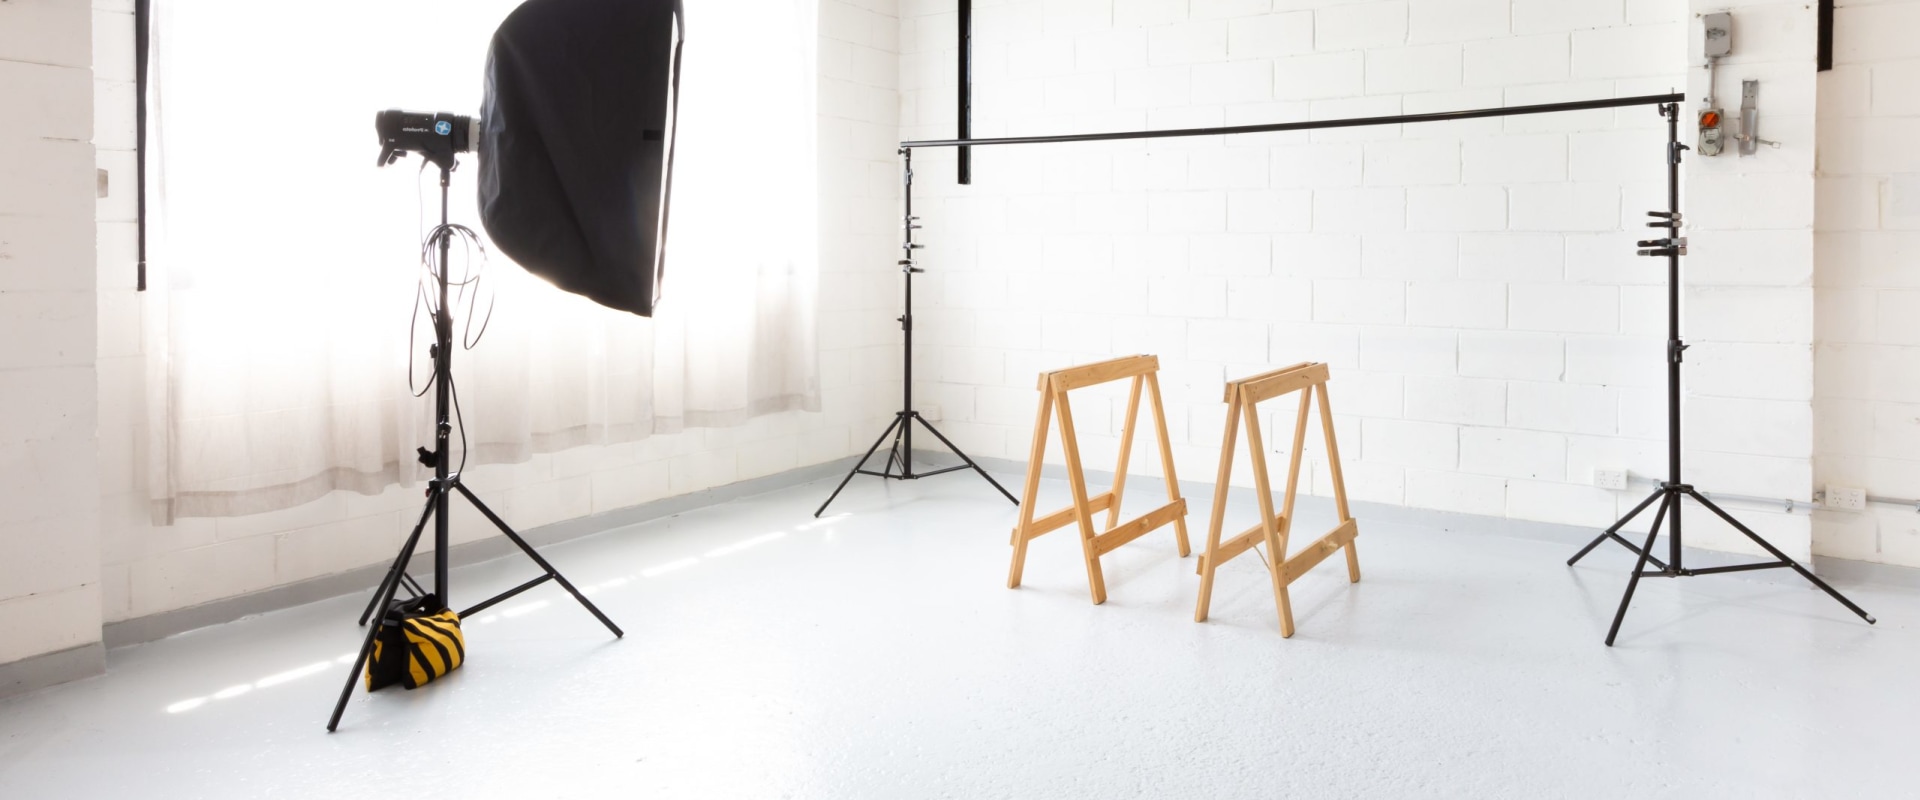 Studio Amenities and Features for Product Photography Studios